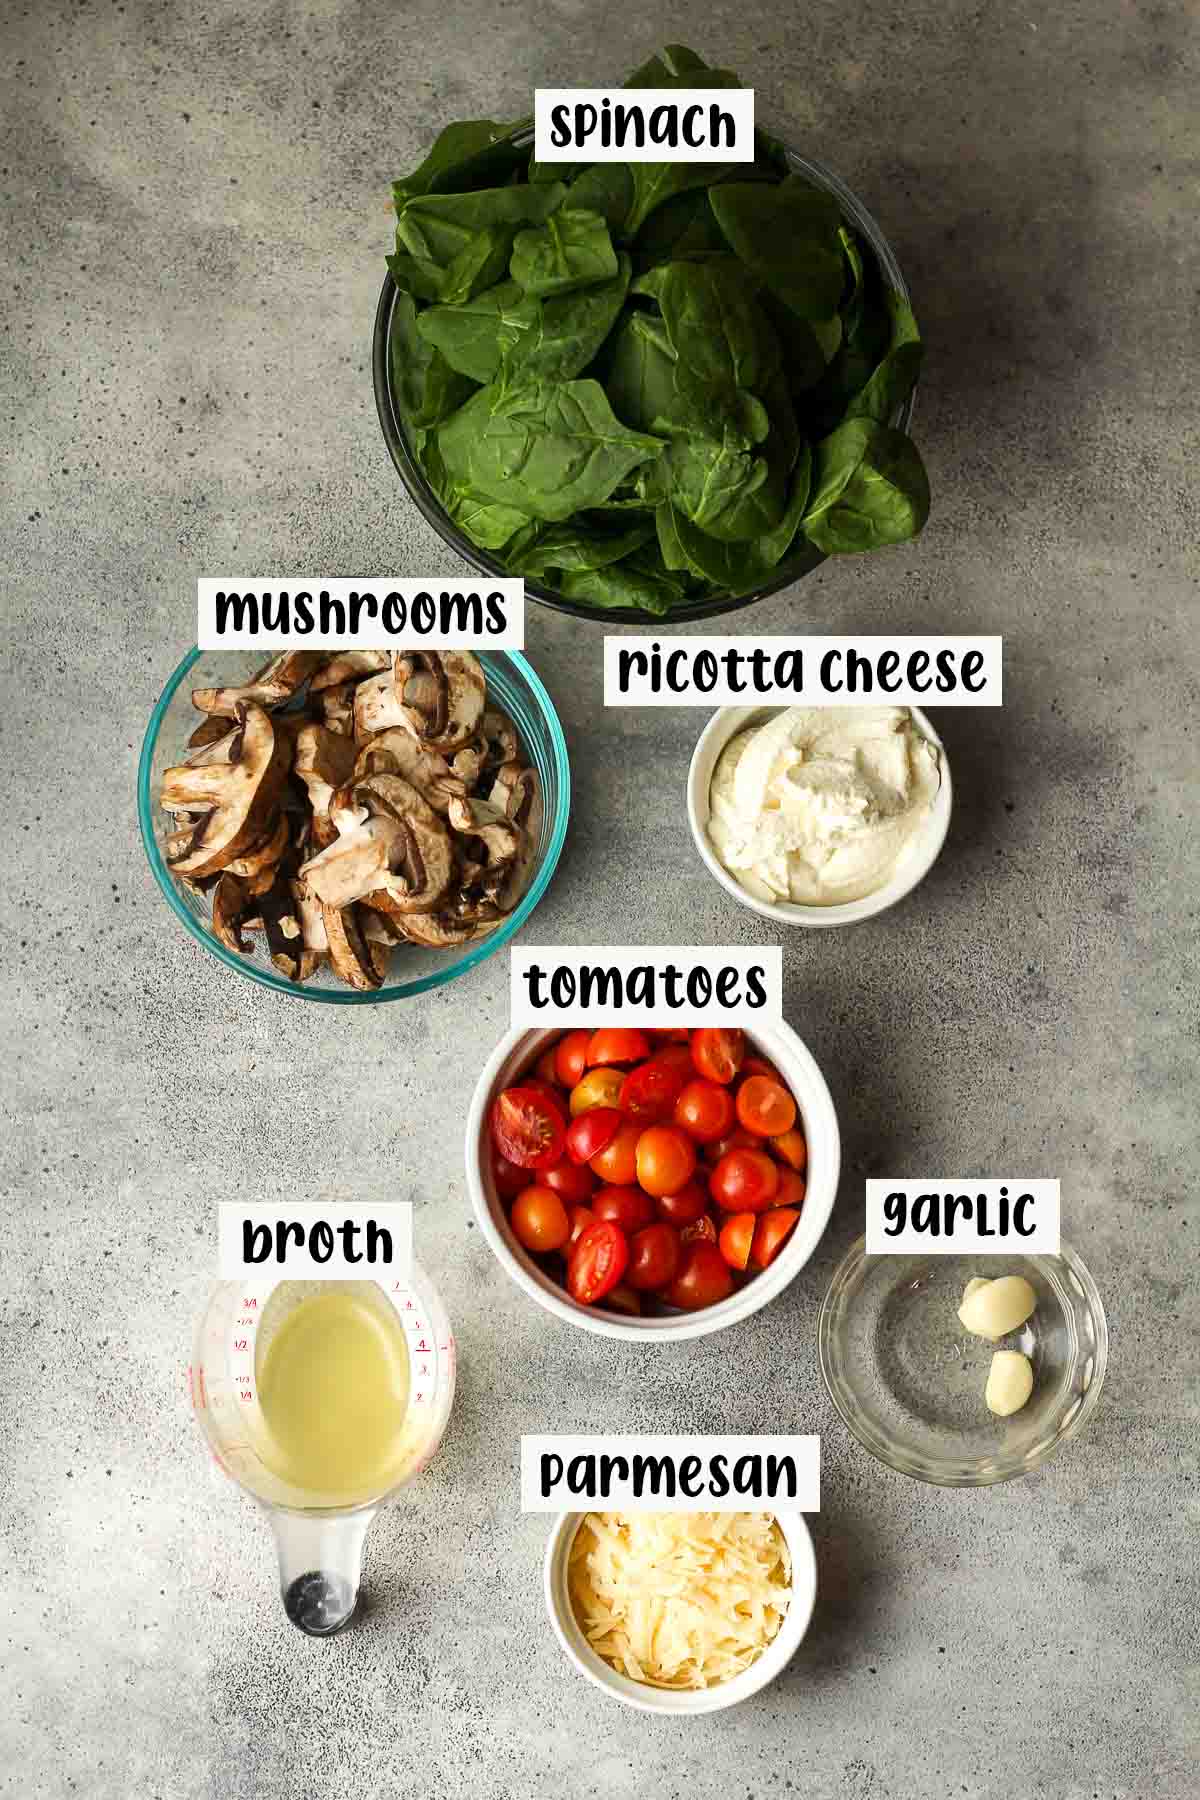 The labeled ingredients for the fish Florentine sauce.